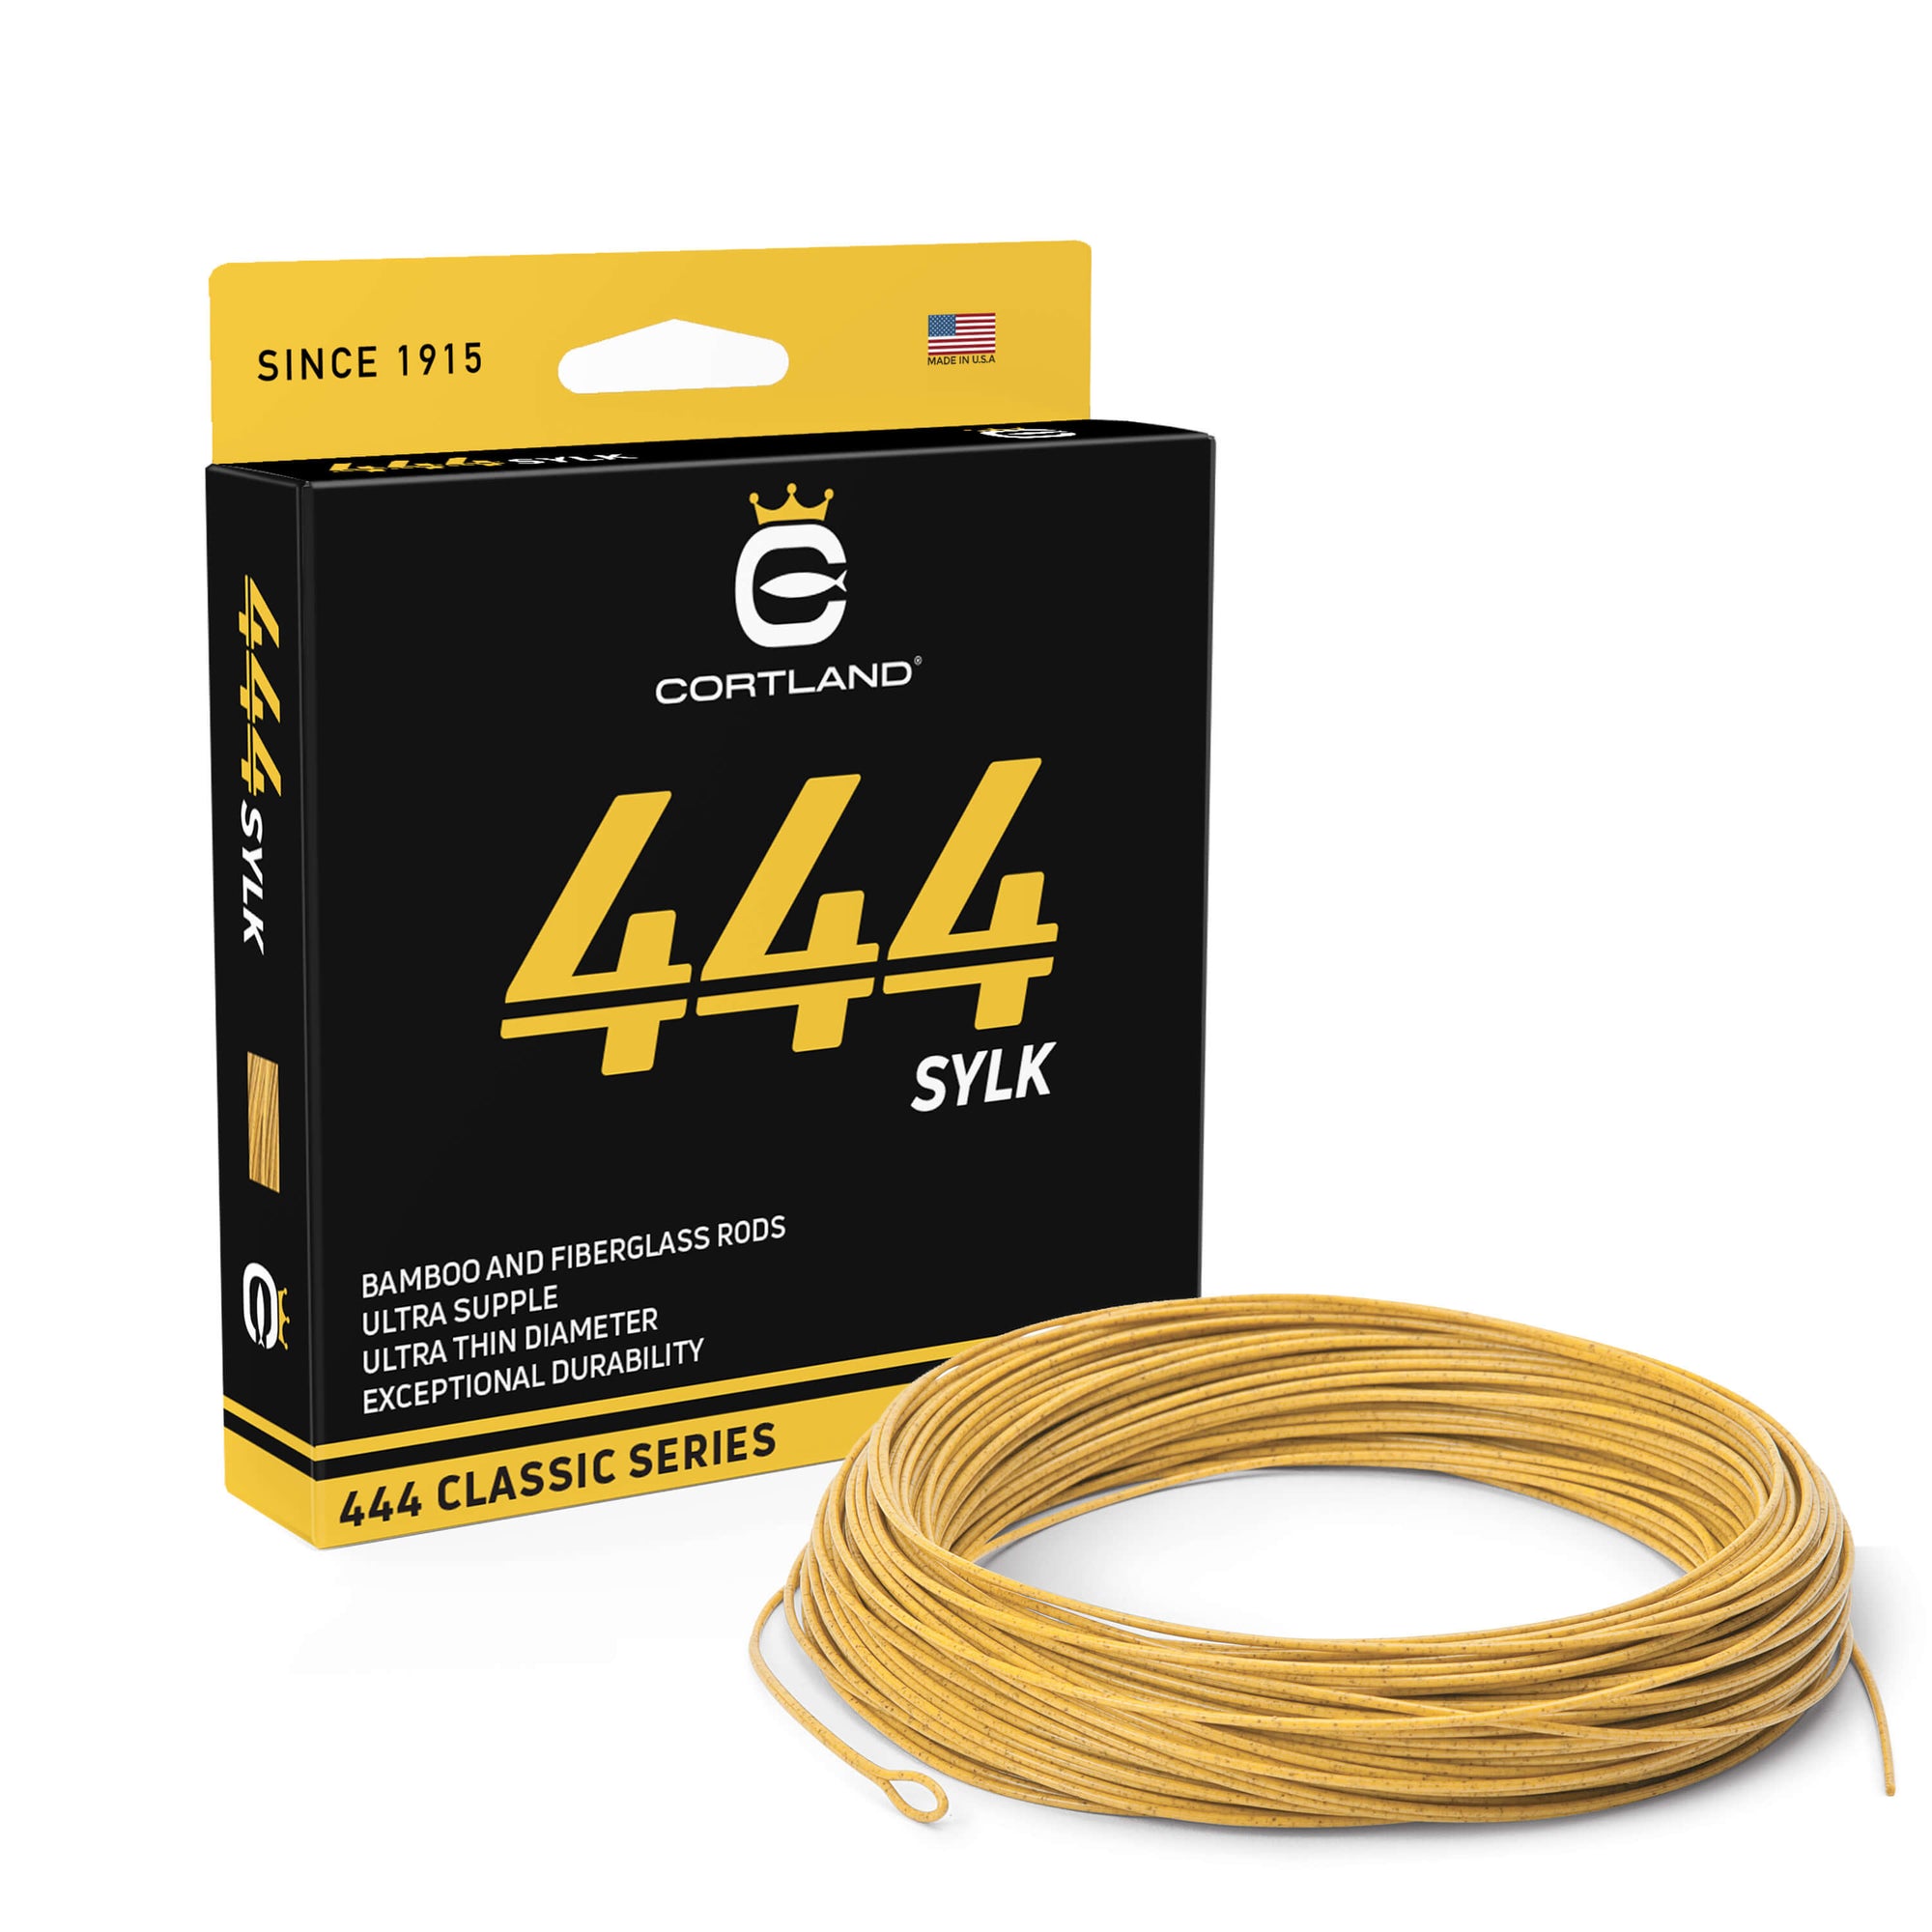 444 Series SYLK Fly Line and box. The fly line is mustard. The box is mustard and black. 